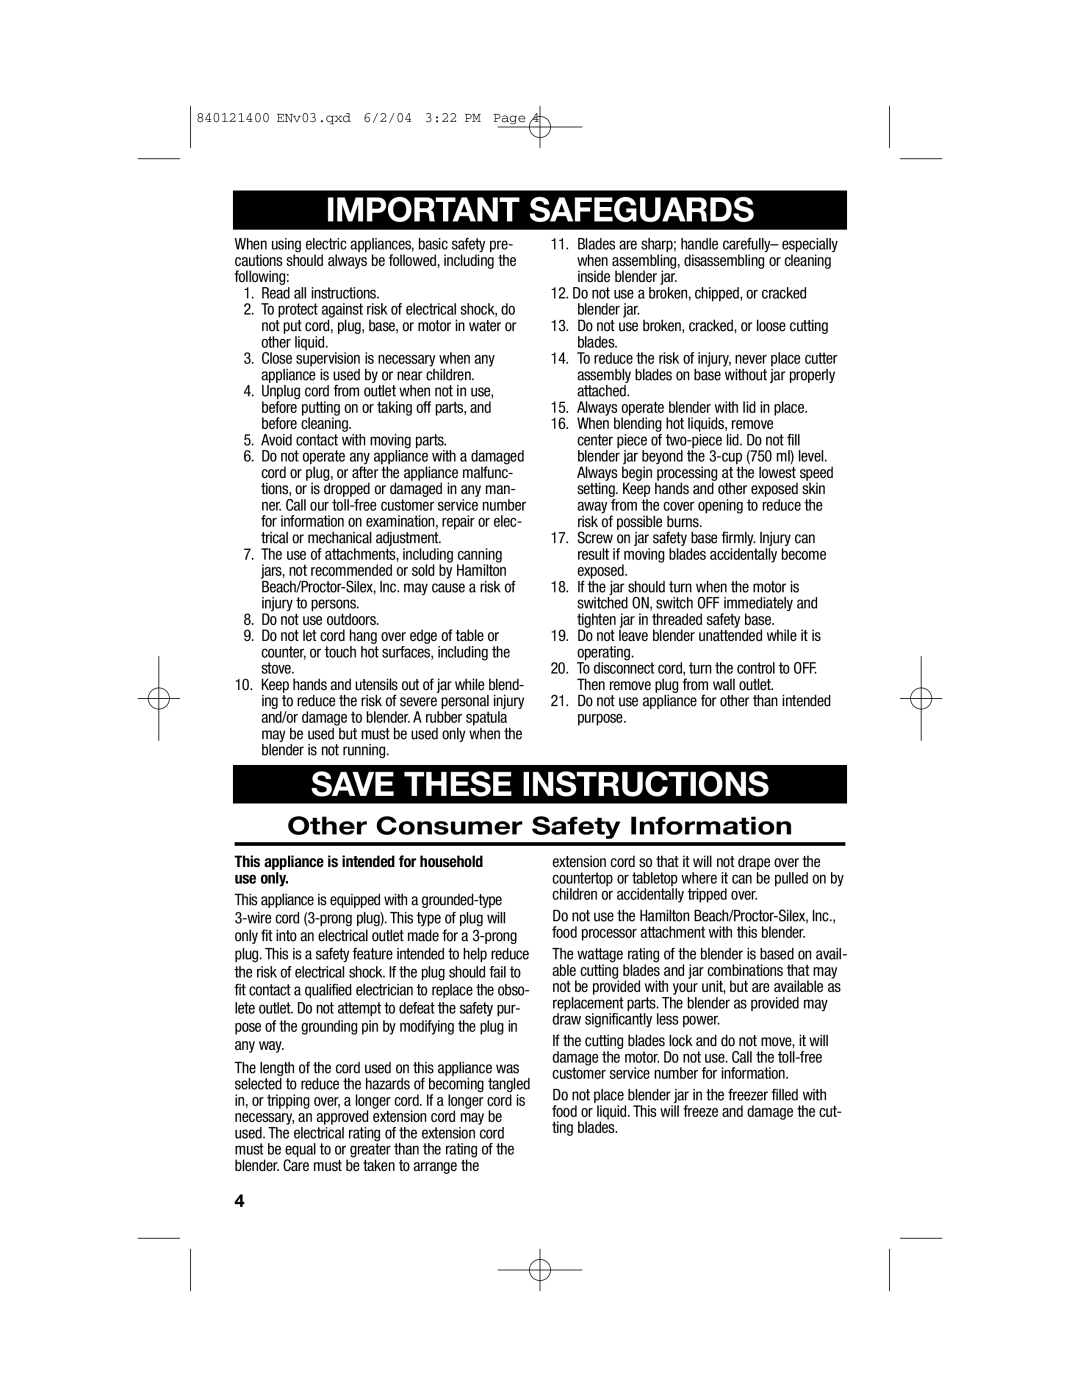 Hamilton Beach All-Metal Blender manual Other Consumer Safety Information, Important Safeguards, Save These Instructions 